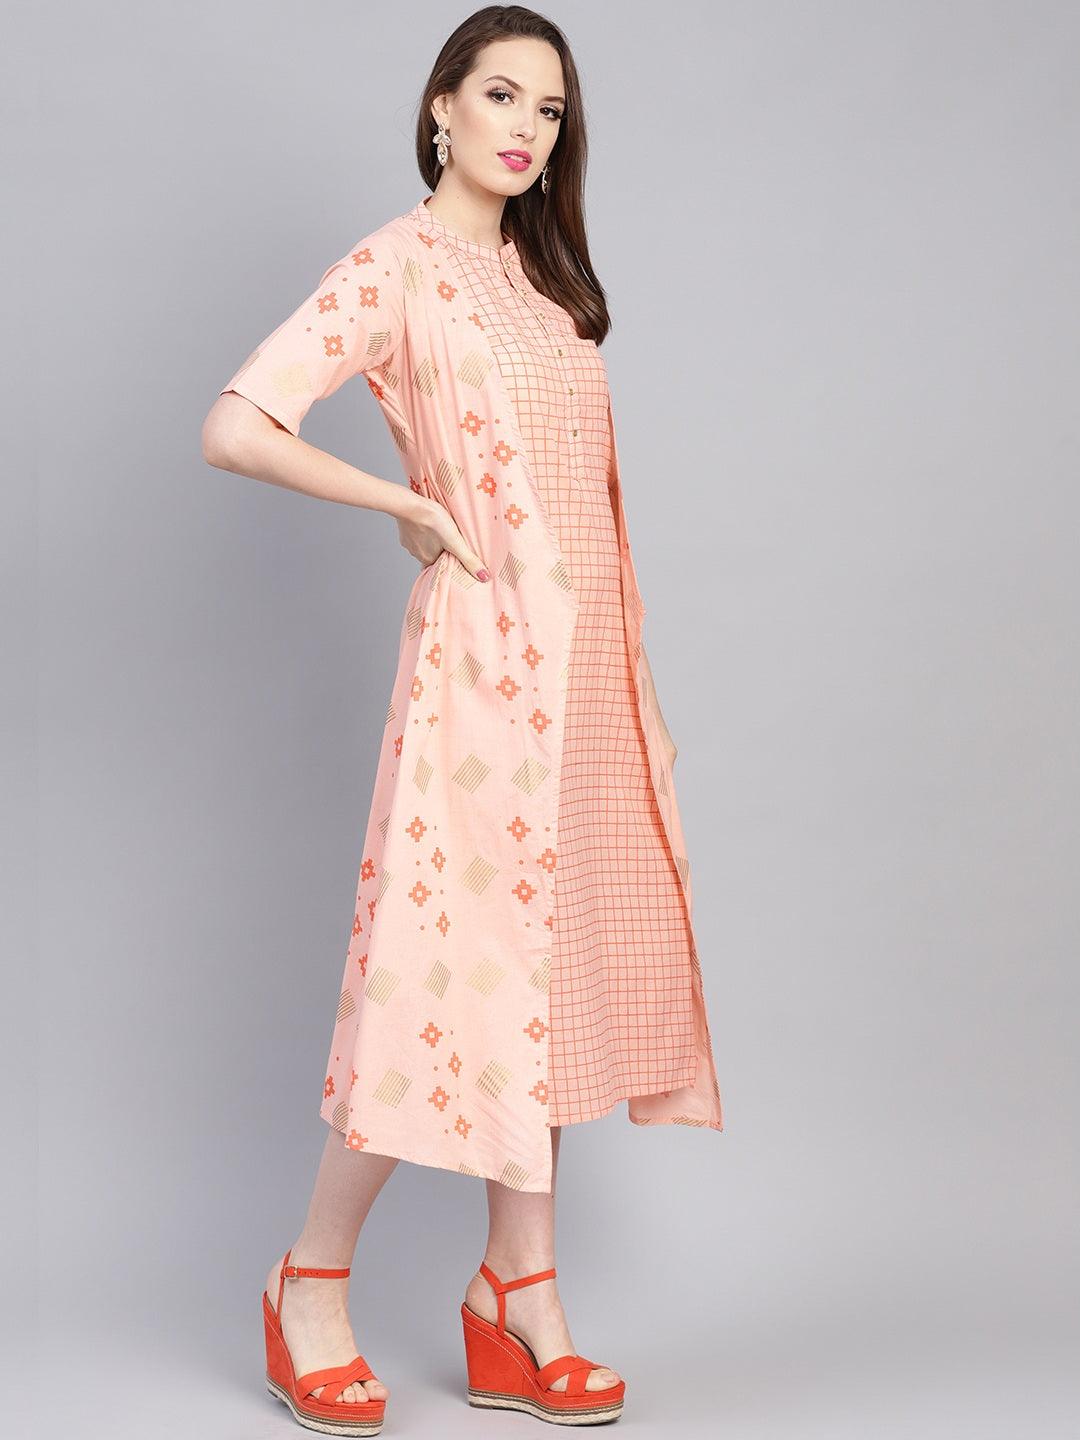 Pink Printed Cotton Dress With Jacket - Libas